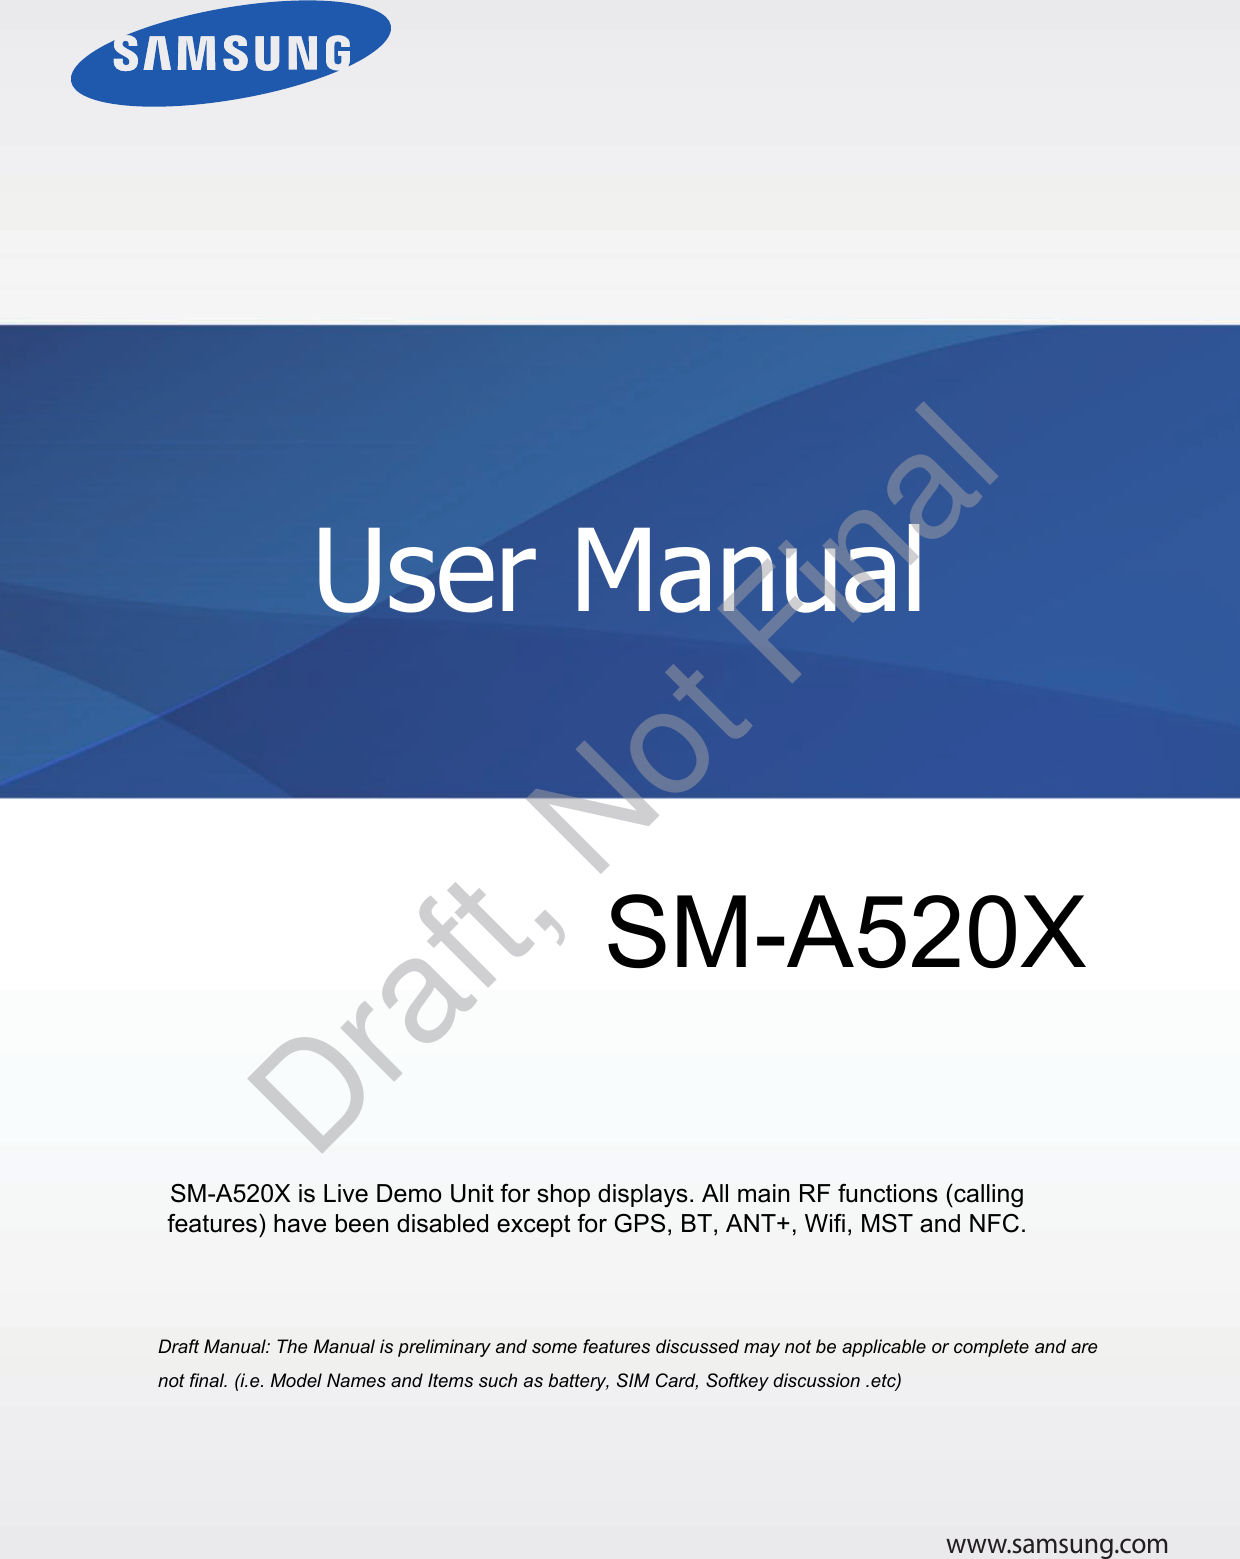 www.samsung.comUser Manuala ana  ana  na and  a dd a n  aa   and a n na  d a and   a a  ad  dn SM-A520X SM-A520X is Live Demo Unit for shop displays. All main RF functions (calling features) have been disabled except for GPS, BT, ANT+, Wifi, MST and NFC.Draft, Not Final